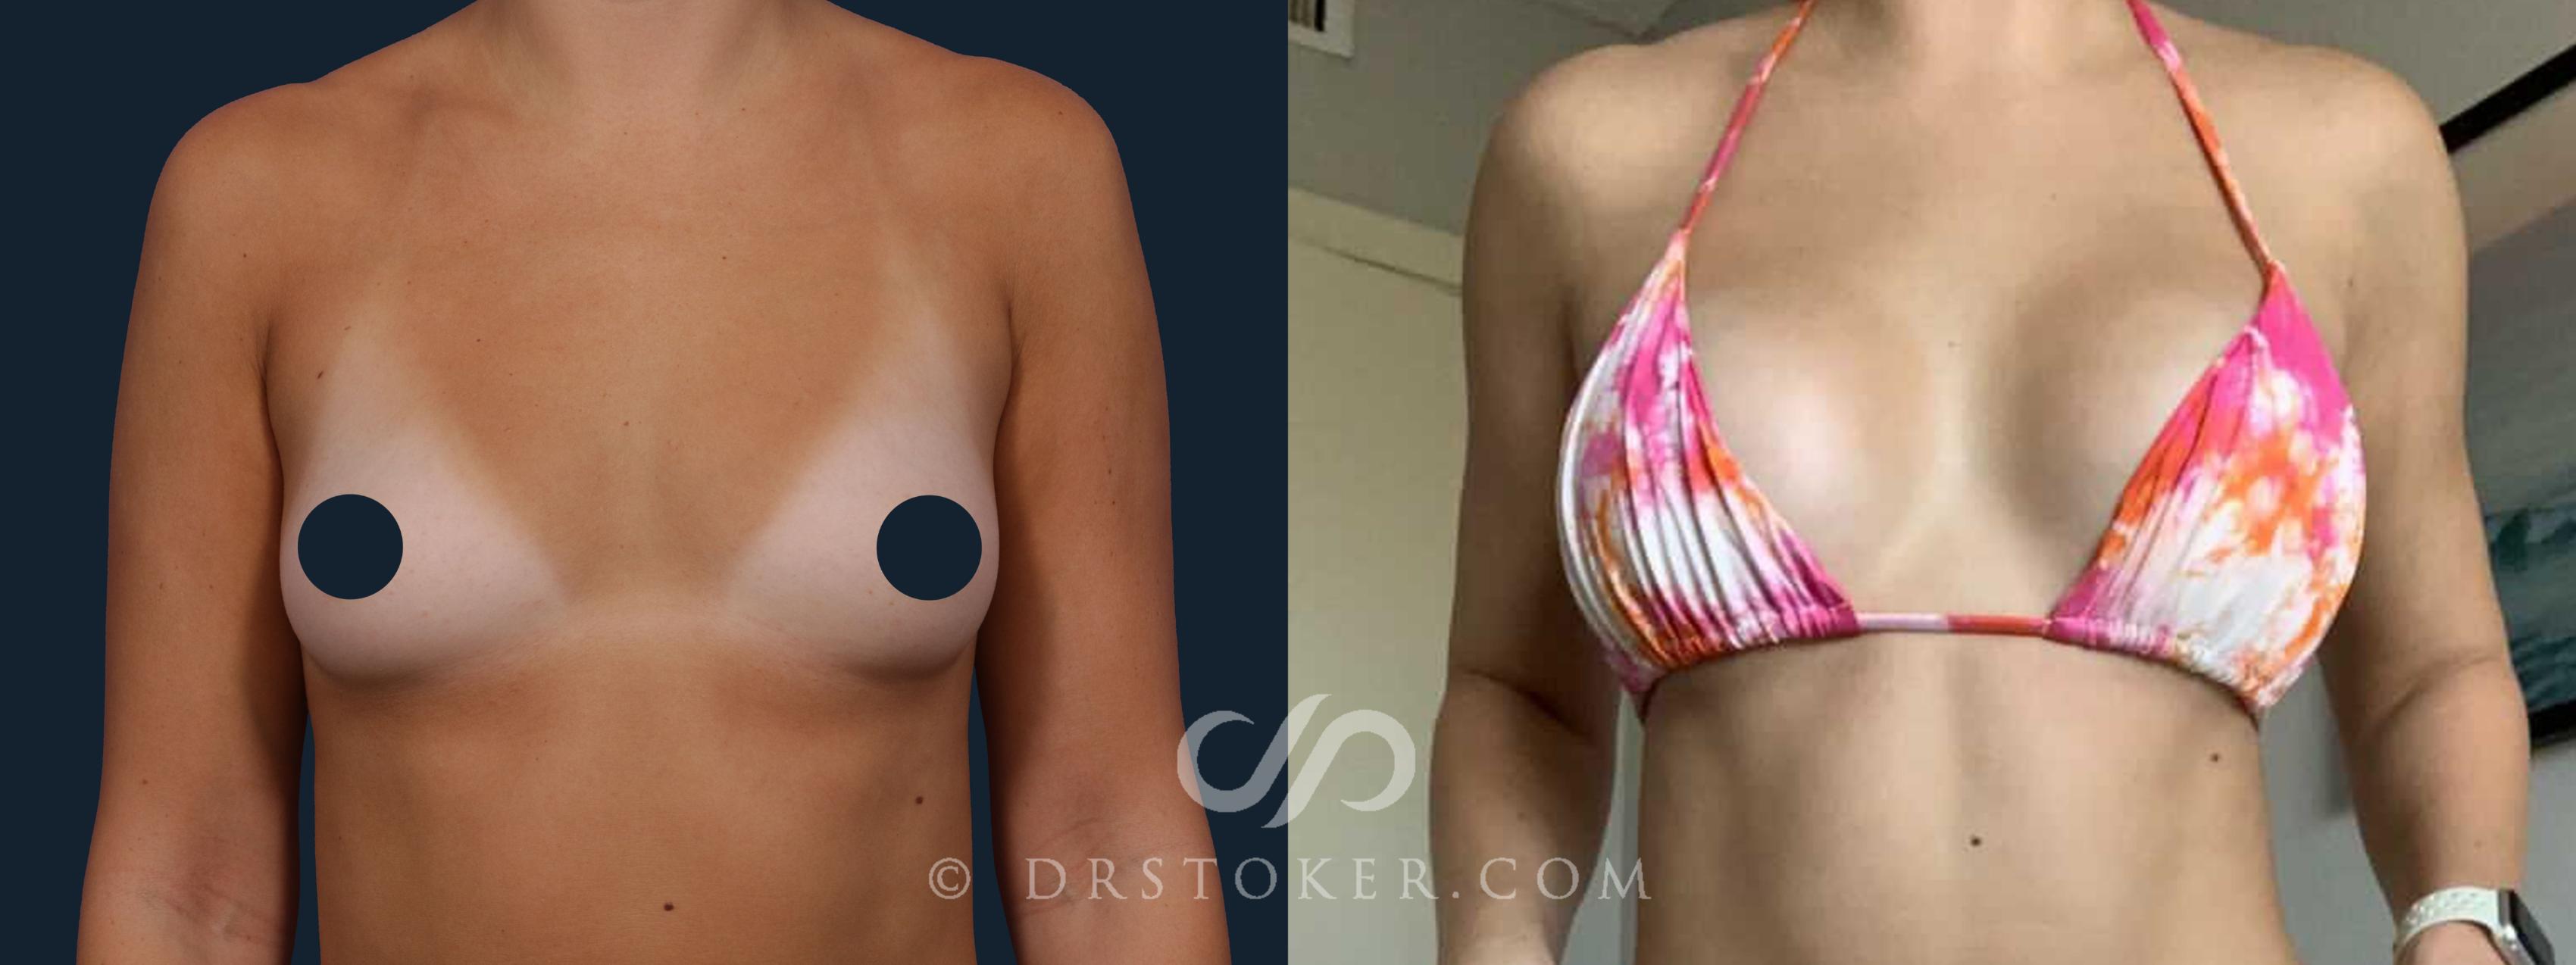 https://images.drstoker.com/content/images/rapid-recovery-breast-augmentation-1793-front-detail.jpg